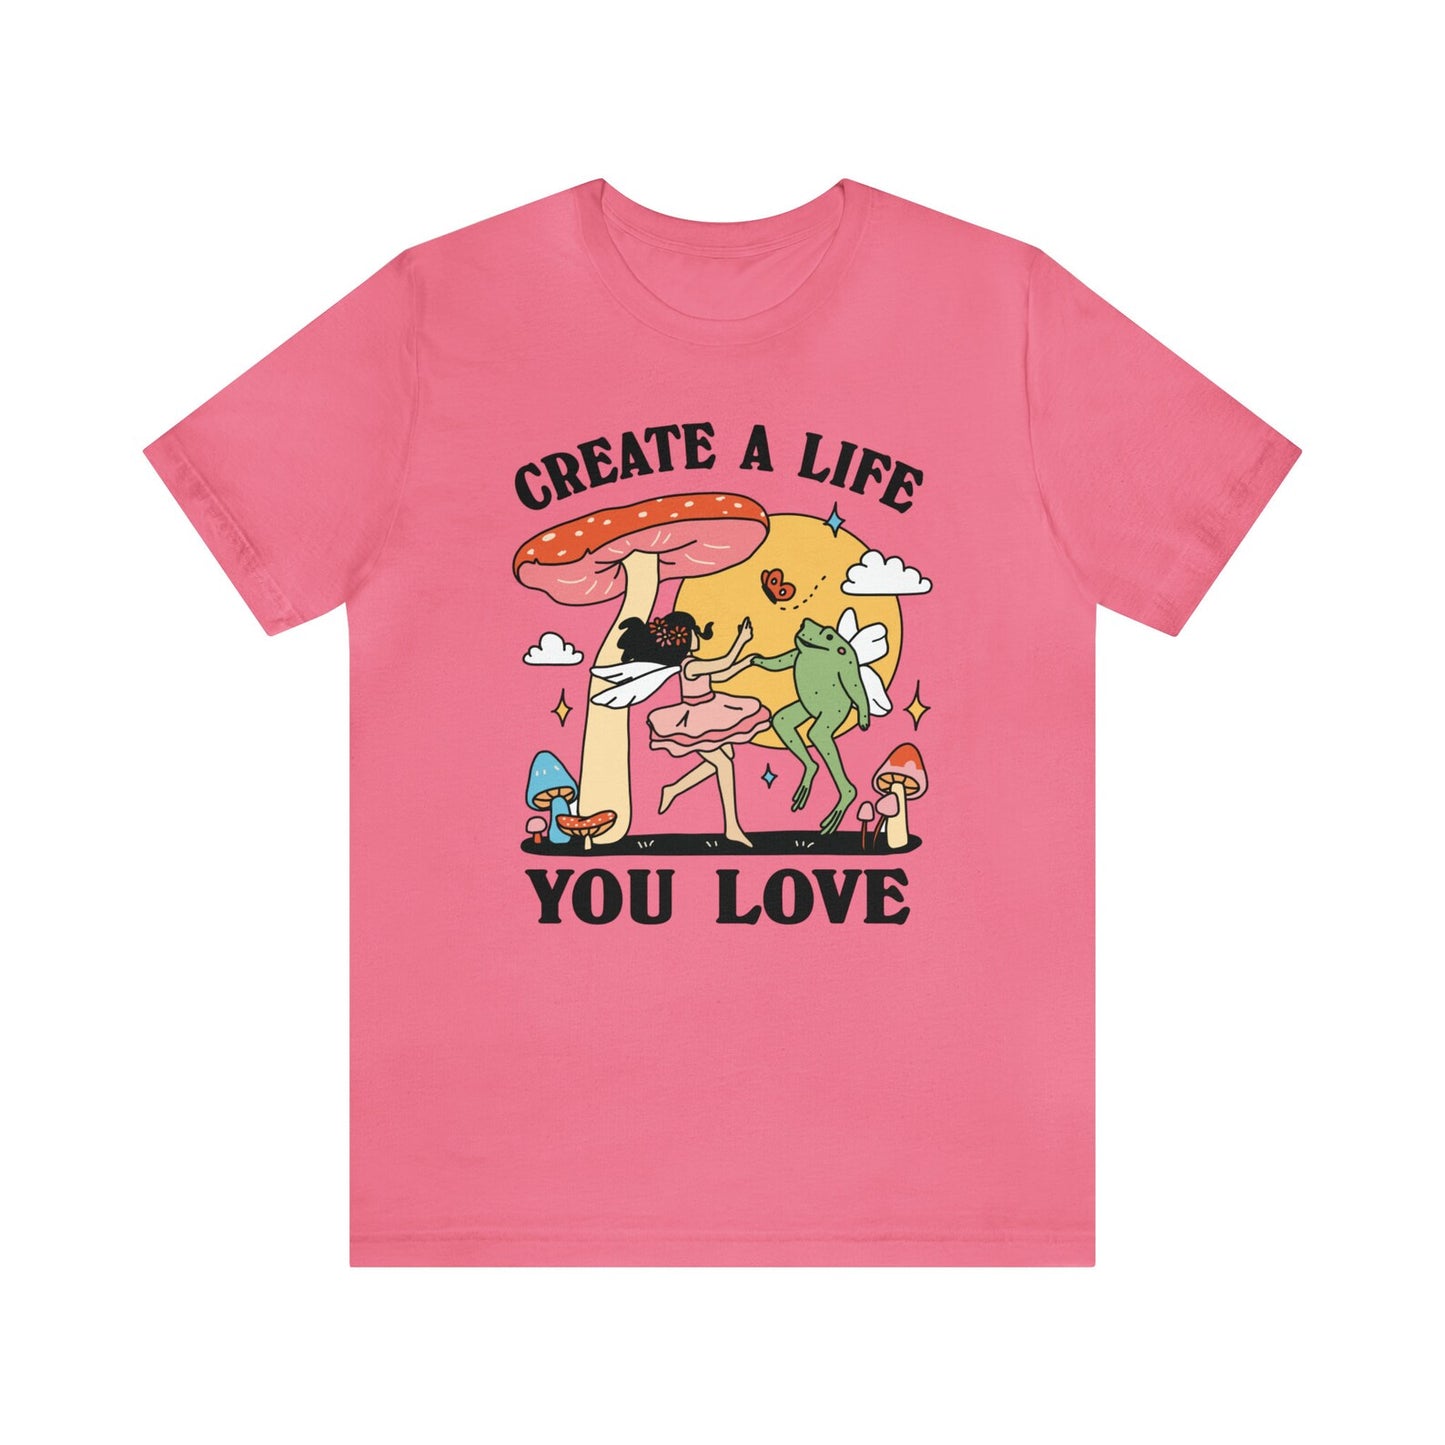 'Create a life you love' Frog & Fairy T-shirt